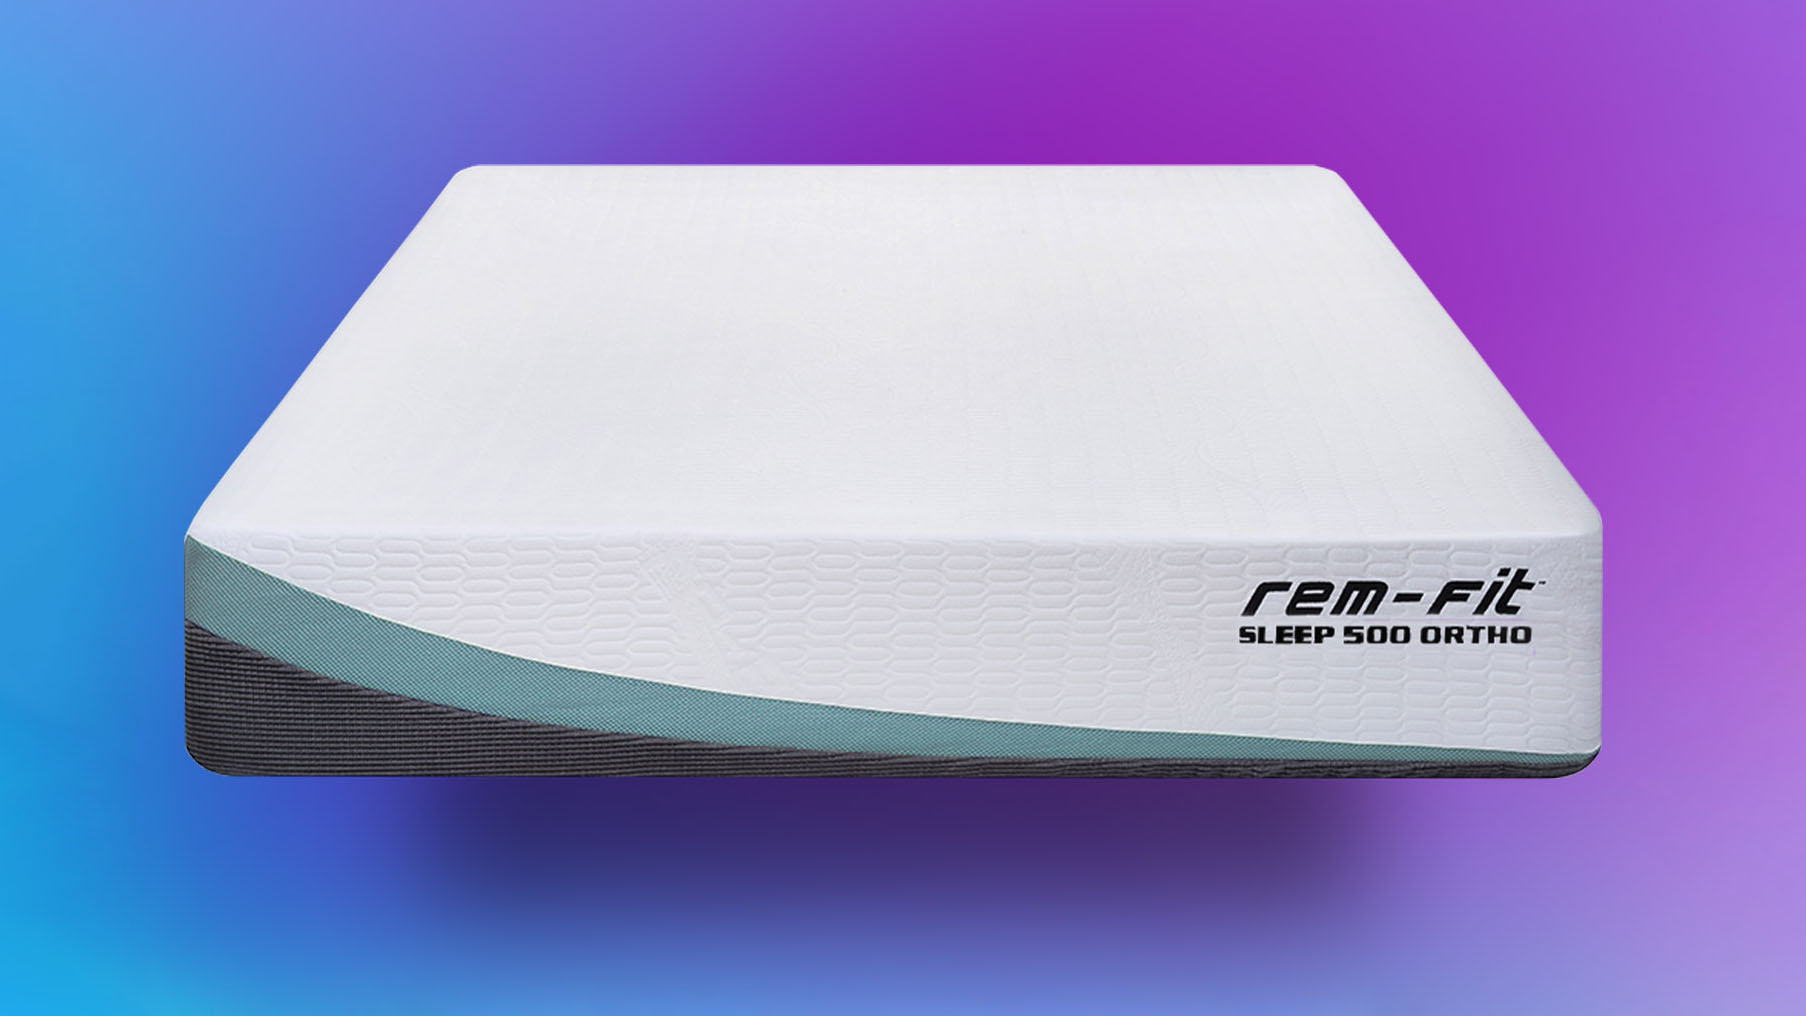 REM-Fit 500 Ortho Hybrid Mattress review: say goodbye to joint